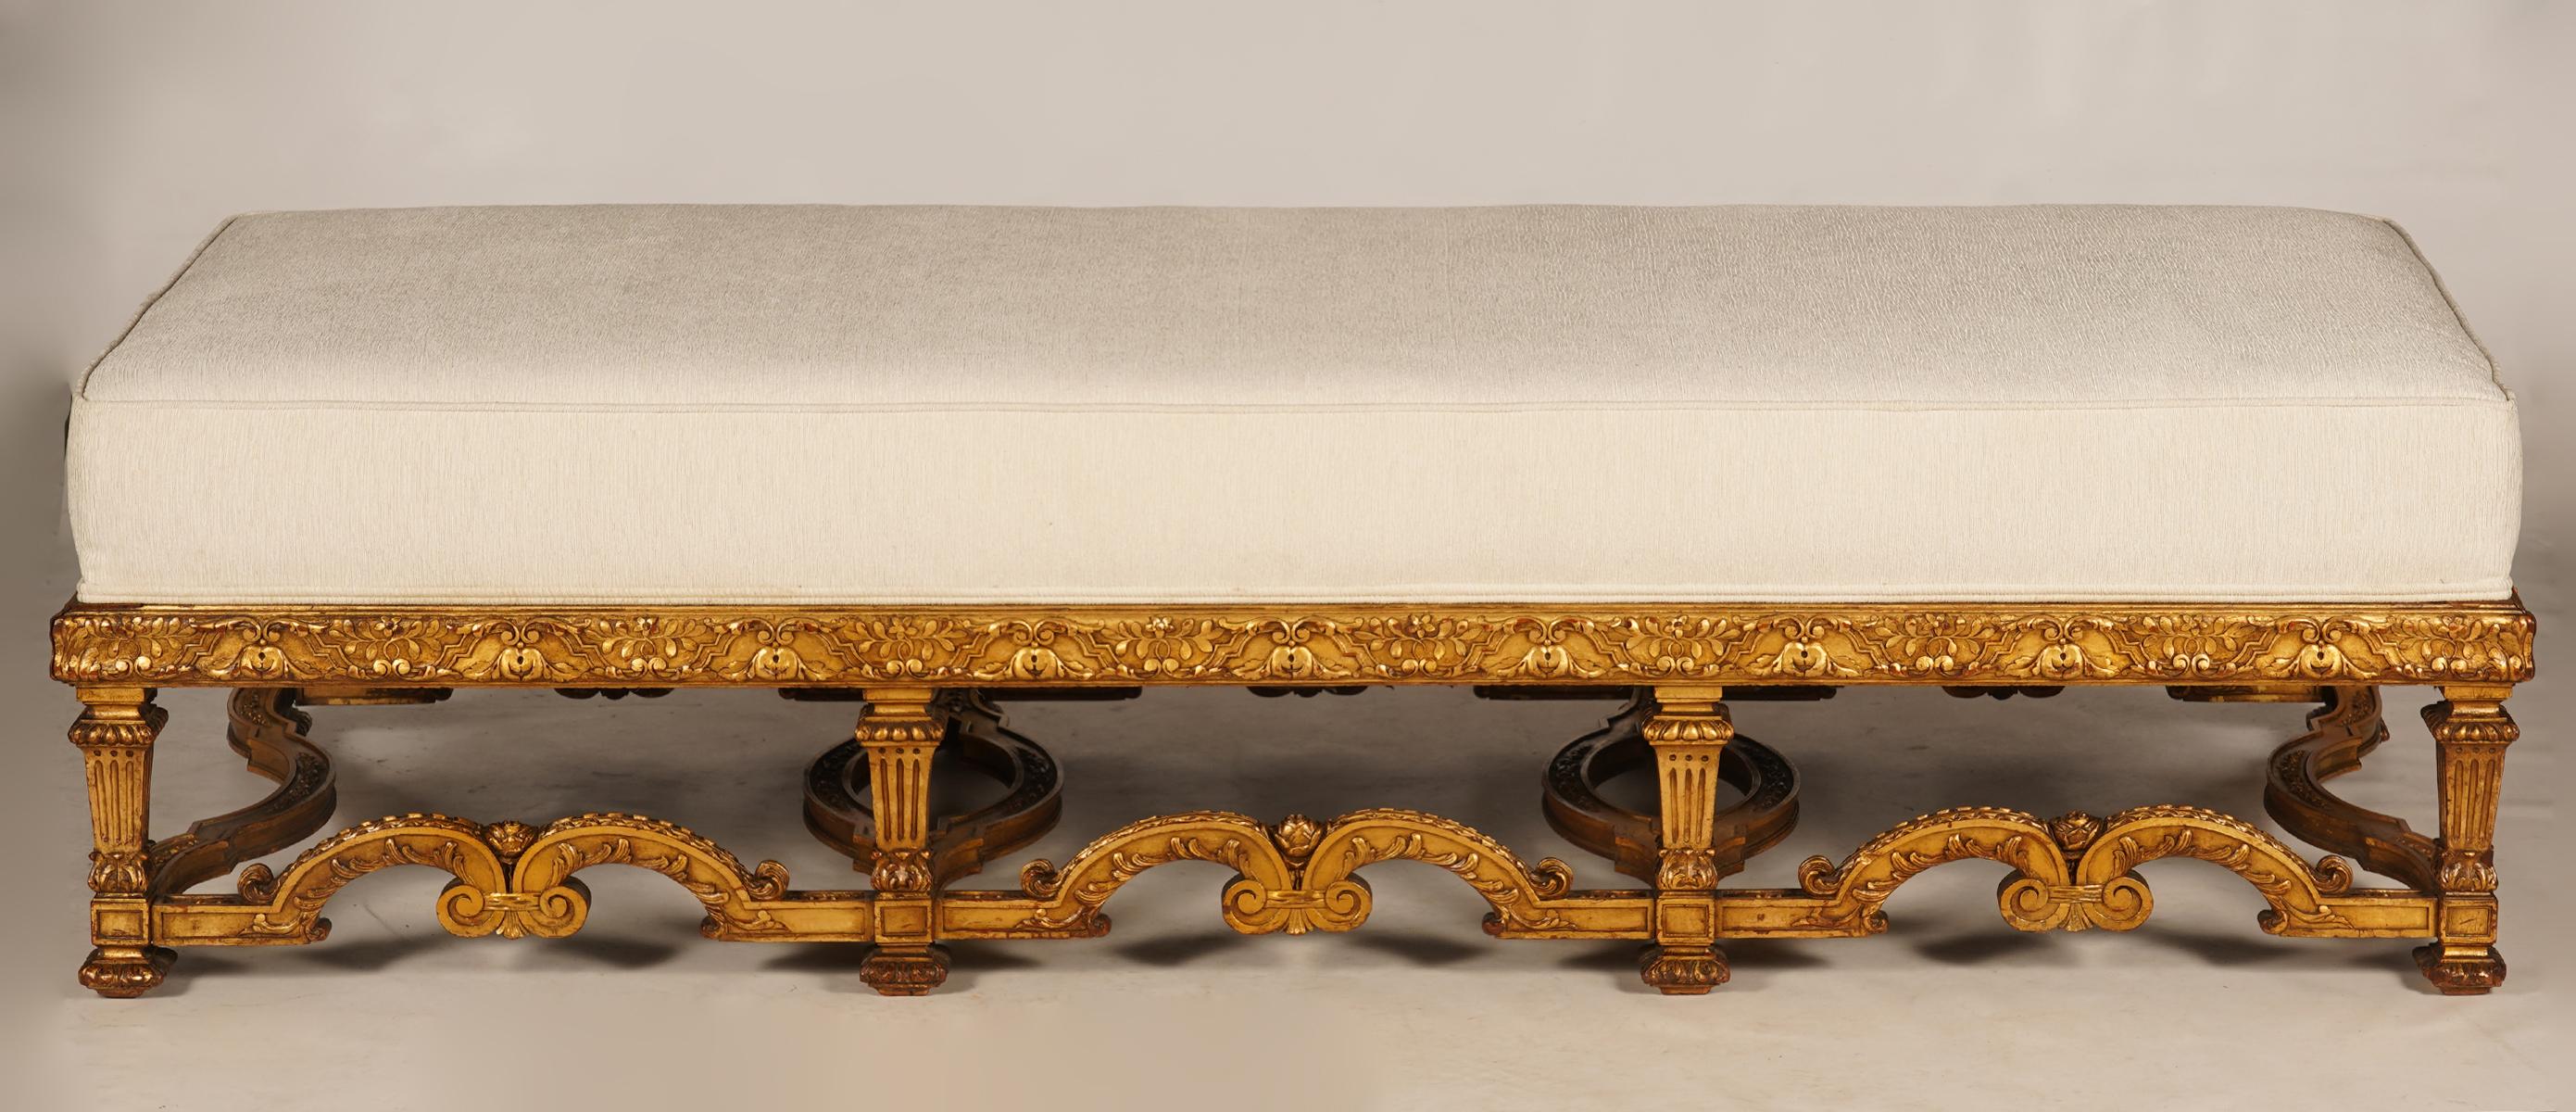 Of generous proportions this bench or daybed features 8 legs interconnected by carved stretchers in the Louis XIV style supporting a thick rectangular upholstered seat covered with off white fabric in mint condition.